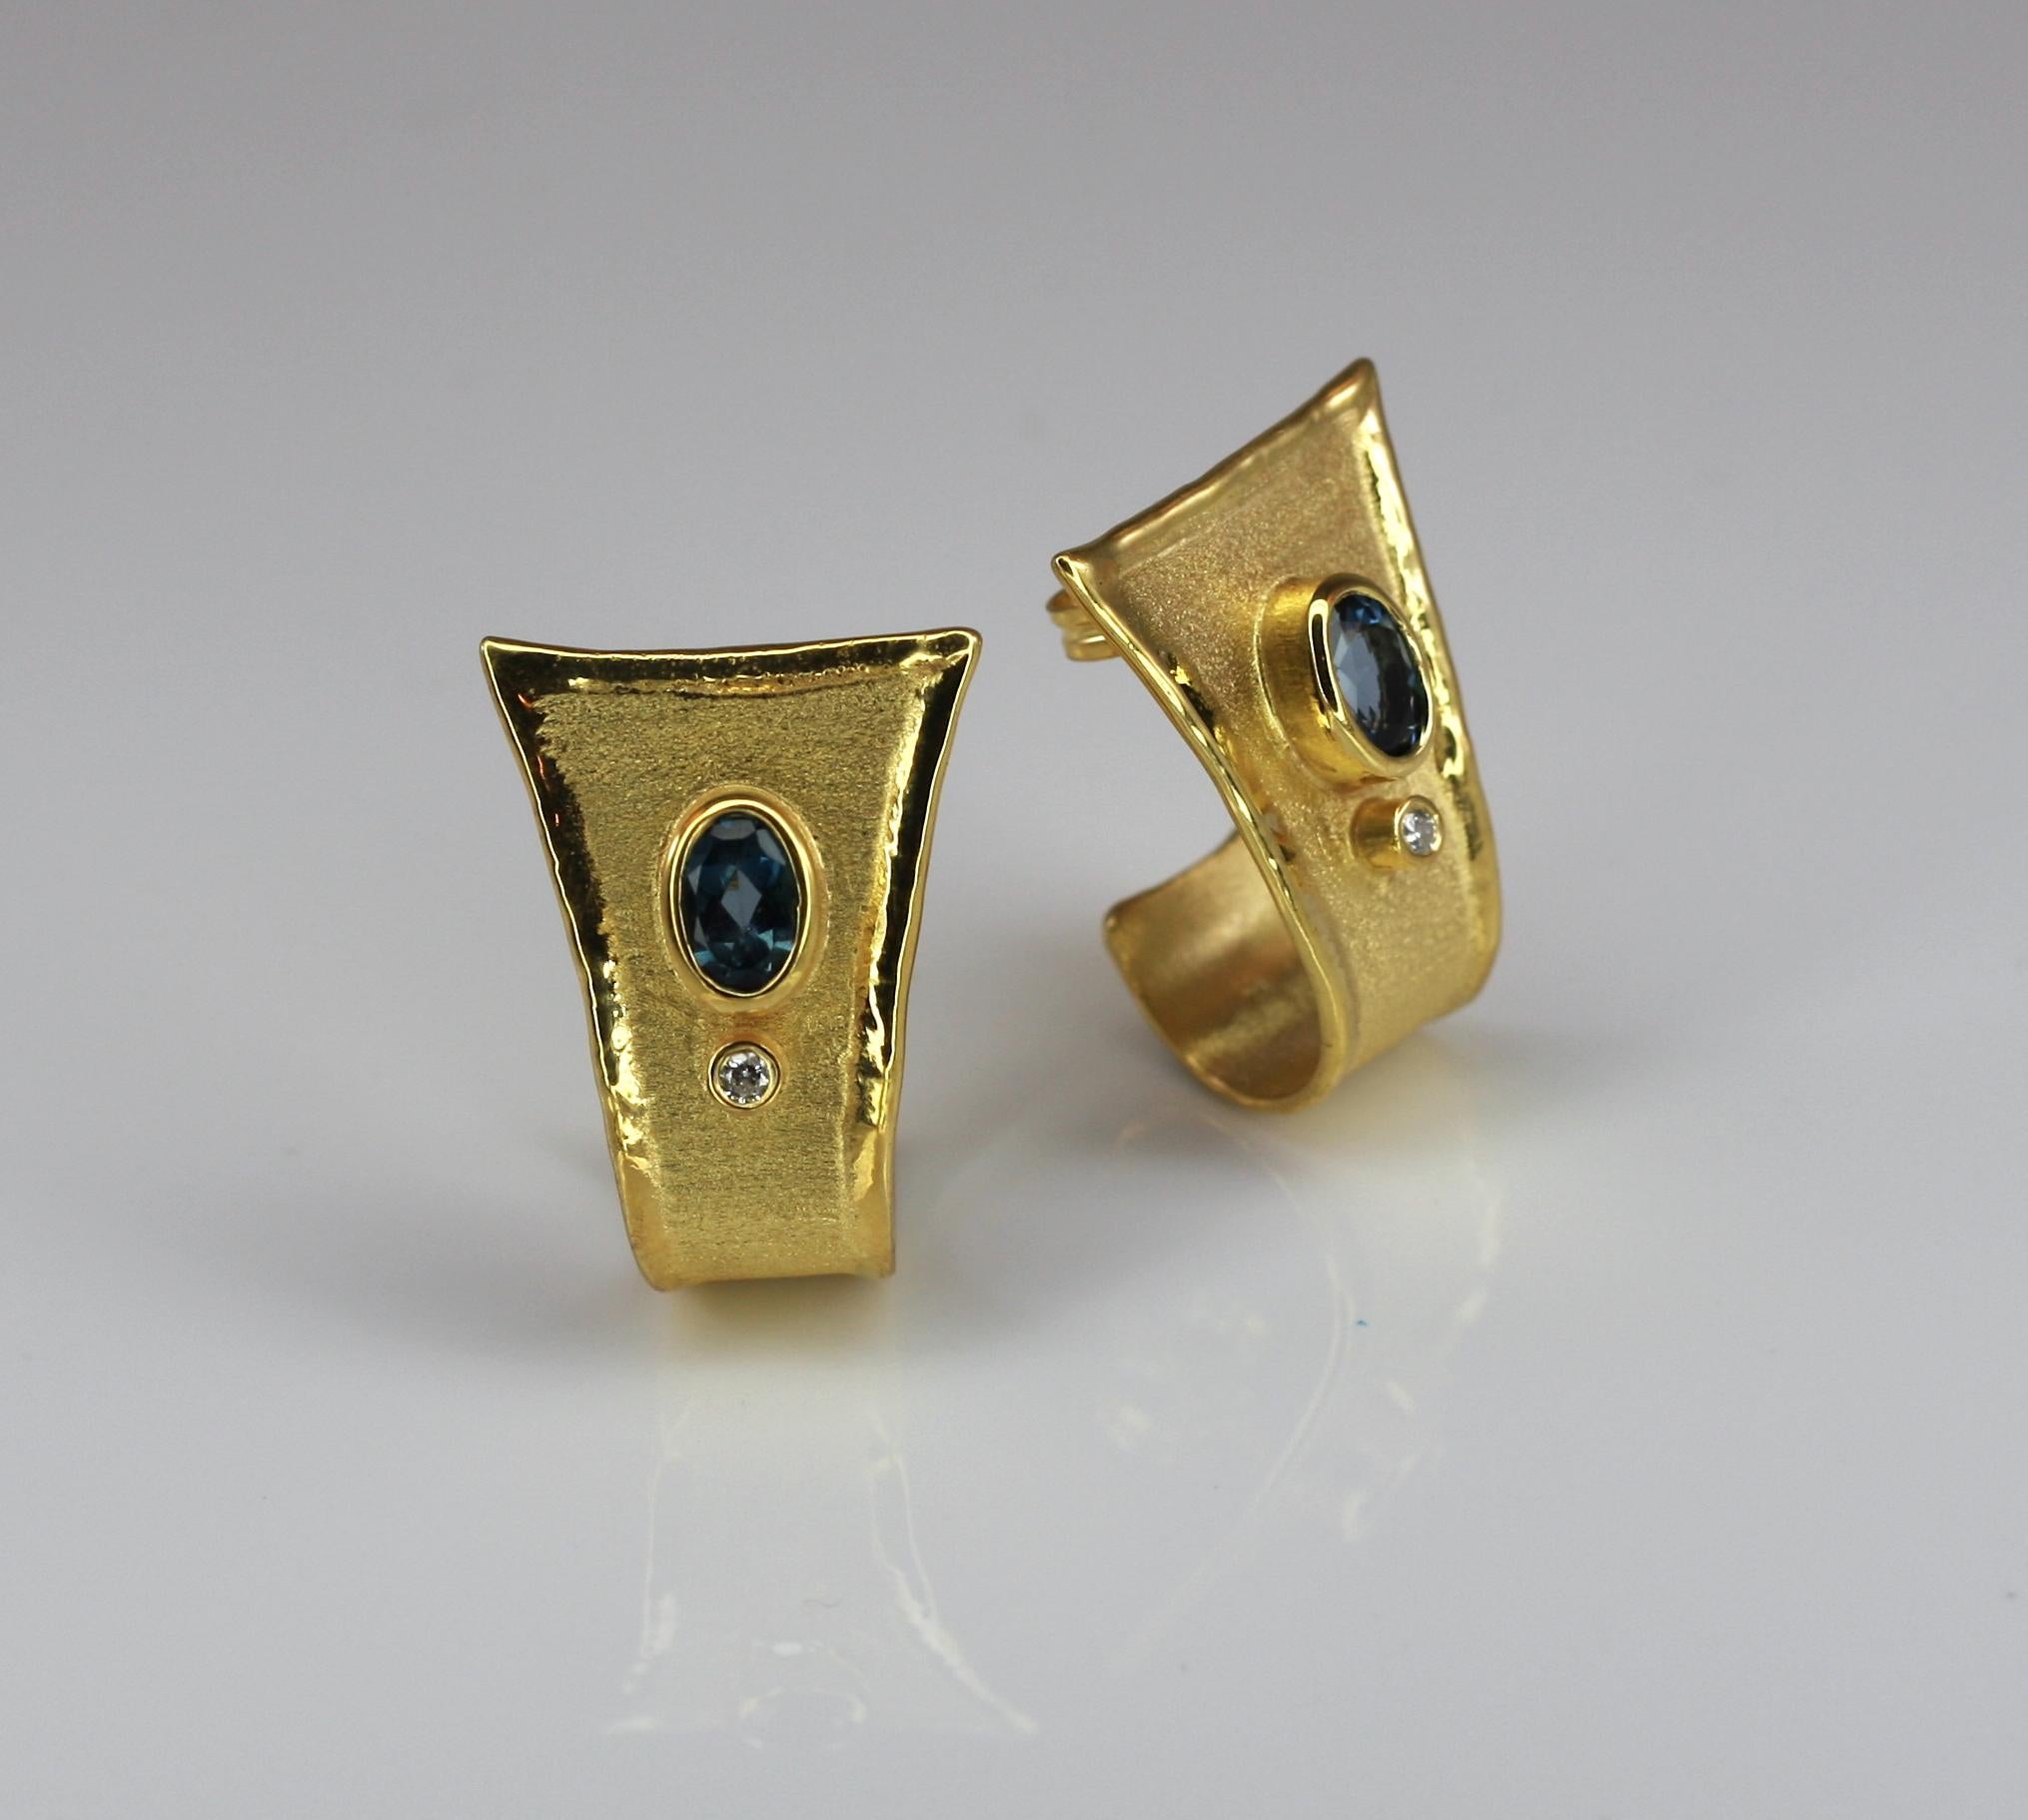 Contemporary Yianni Creations 2.20 Carat Blue Topaz and Diamond Earrings in 18 Karat Gold For Sale